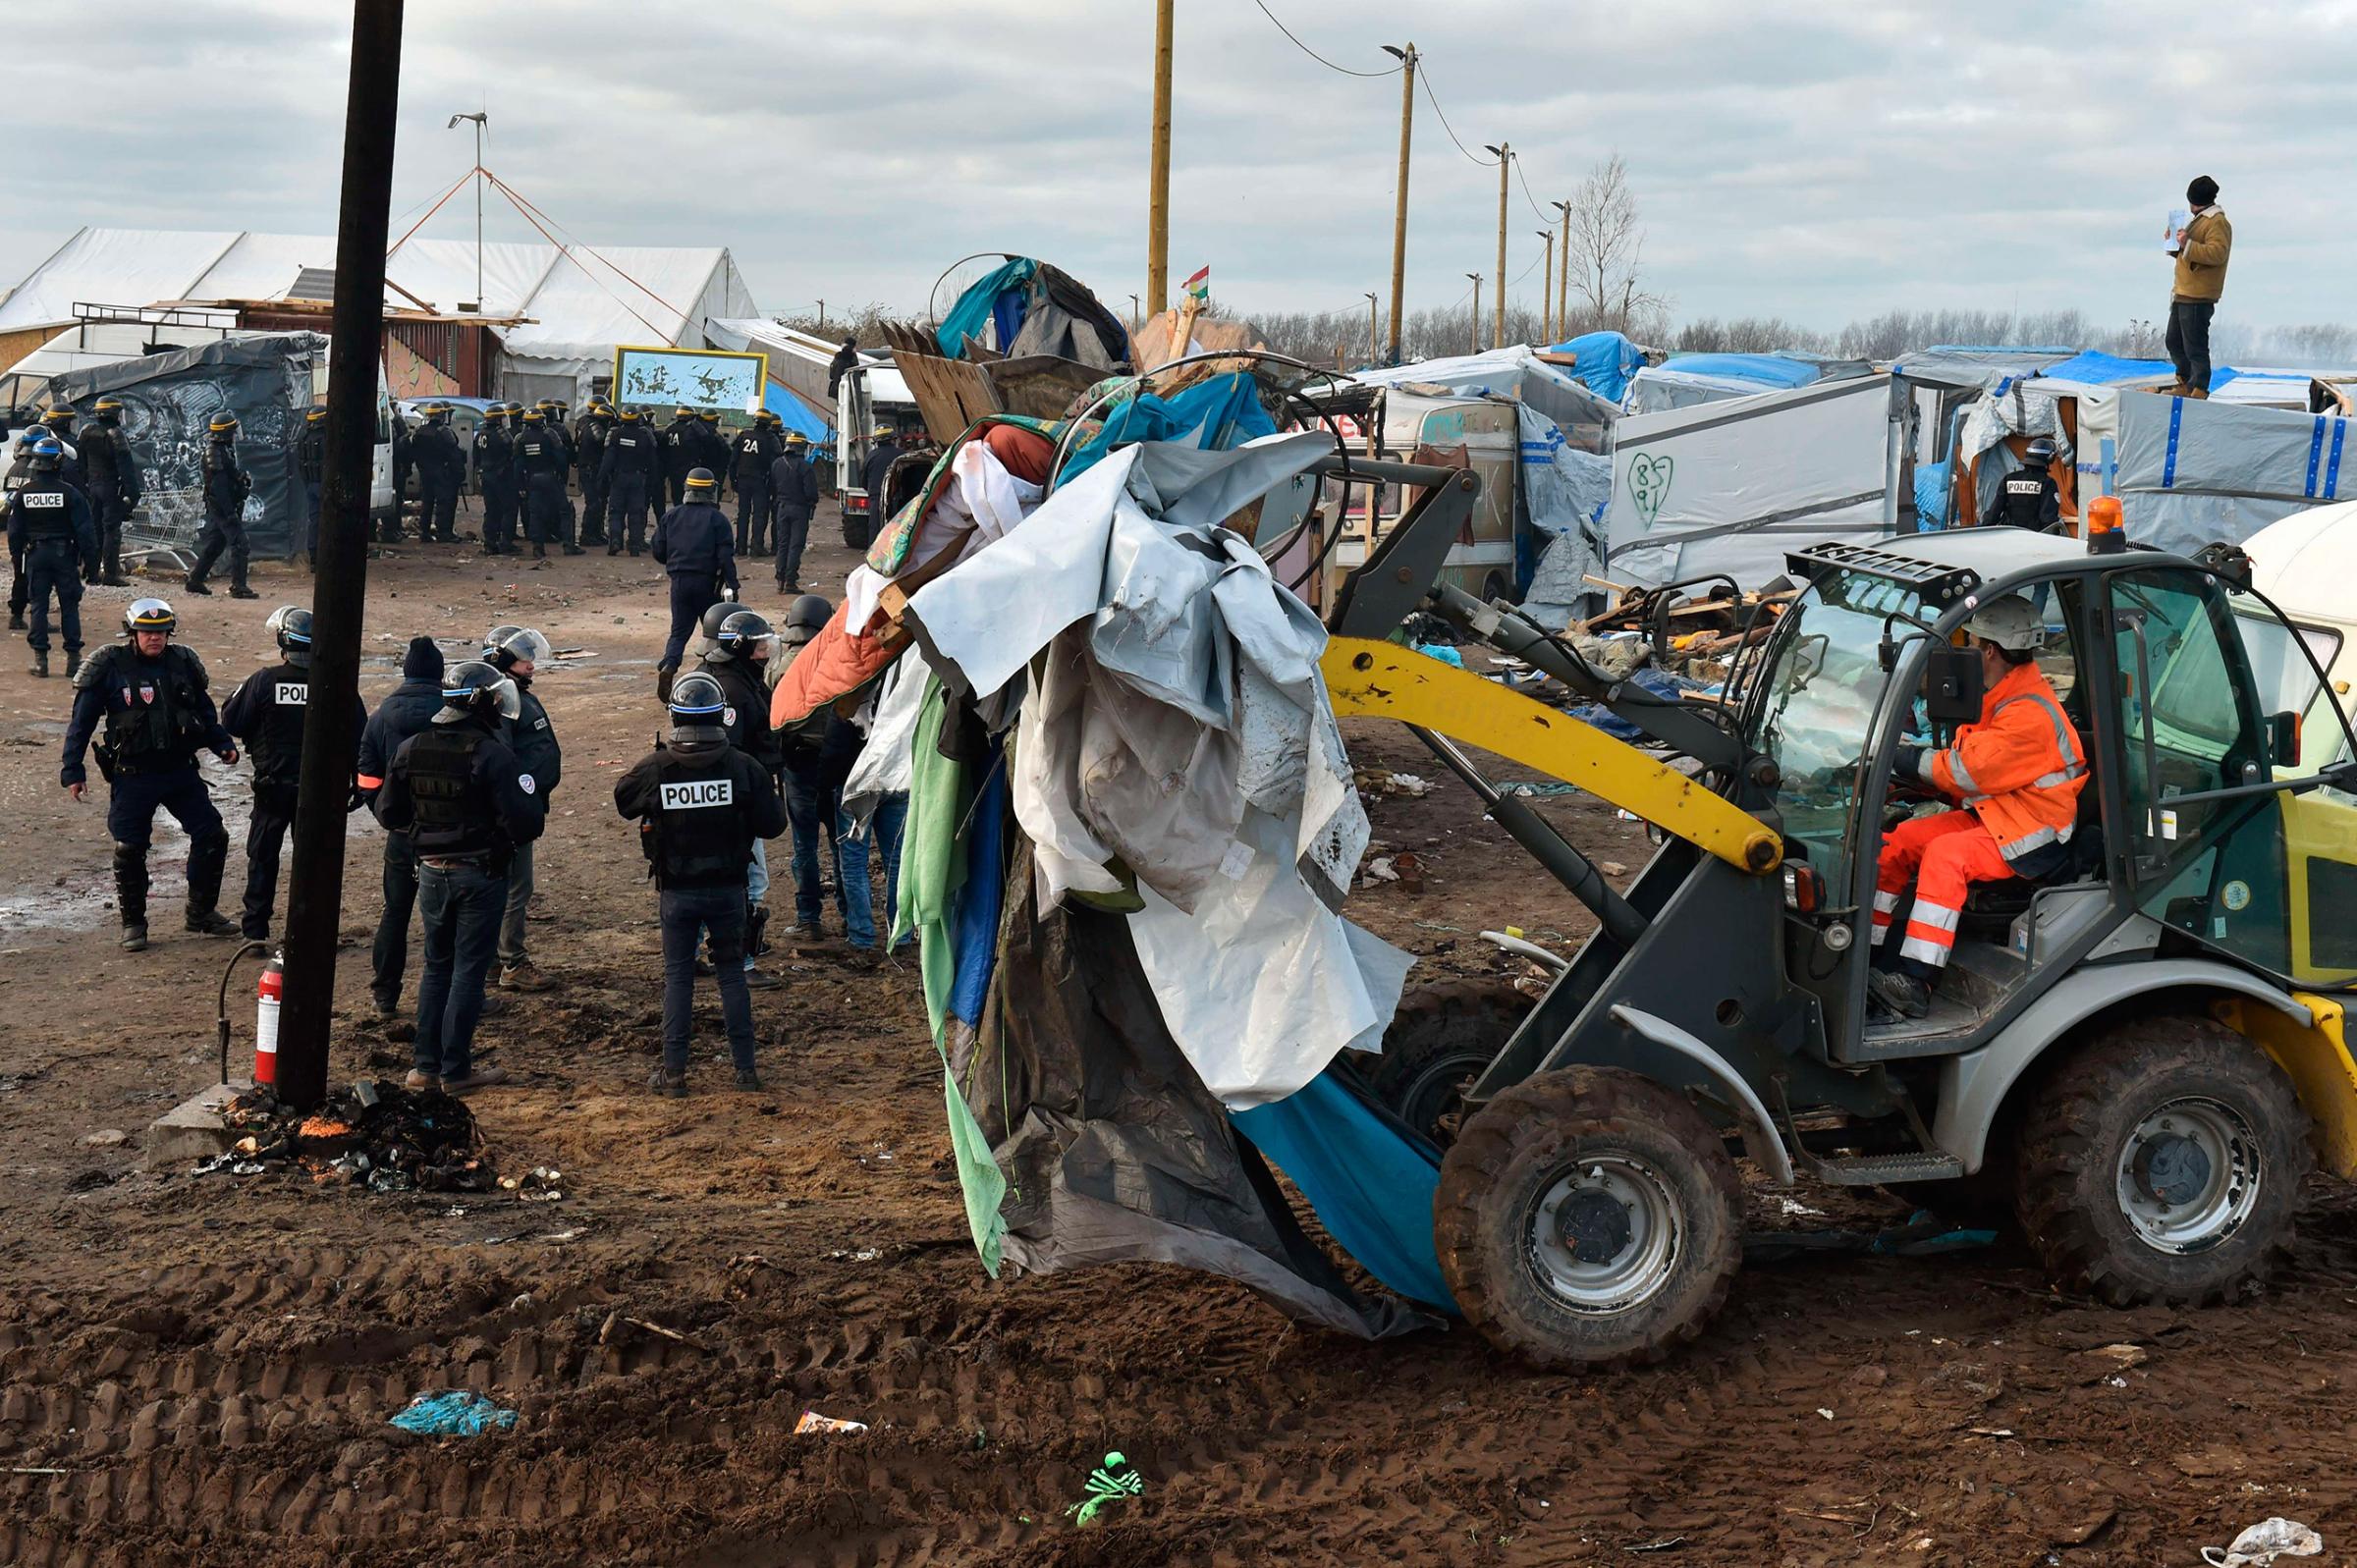 A bulldozer dismantles shelters in the "Jungle" migrant camp in the northern port city of Calais, France, Feb. 29, 2016.